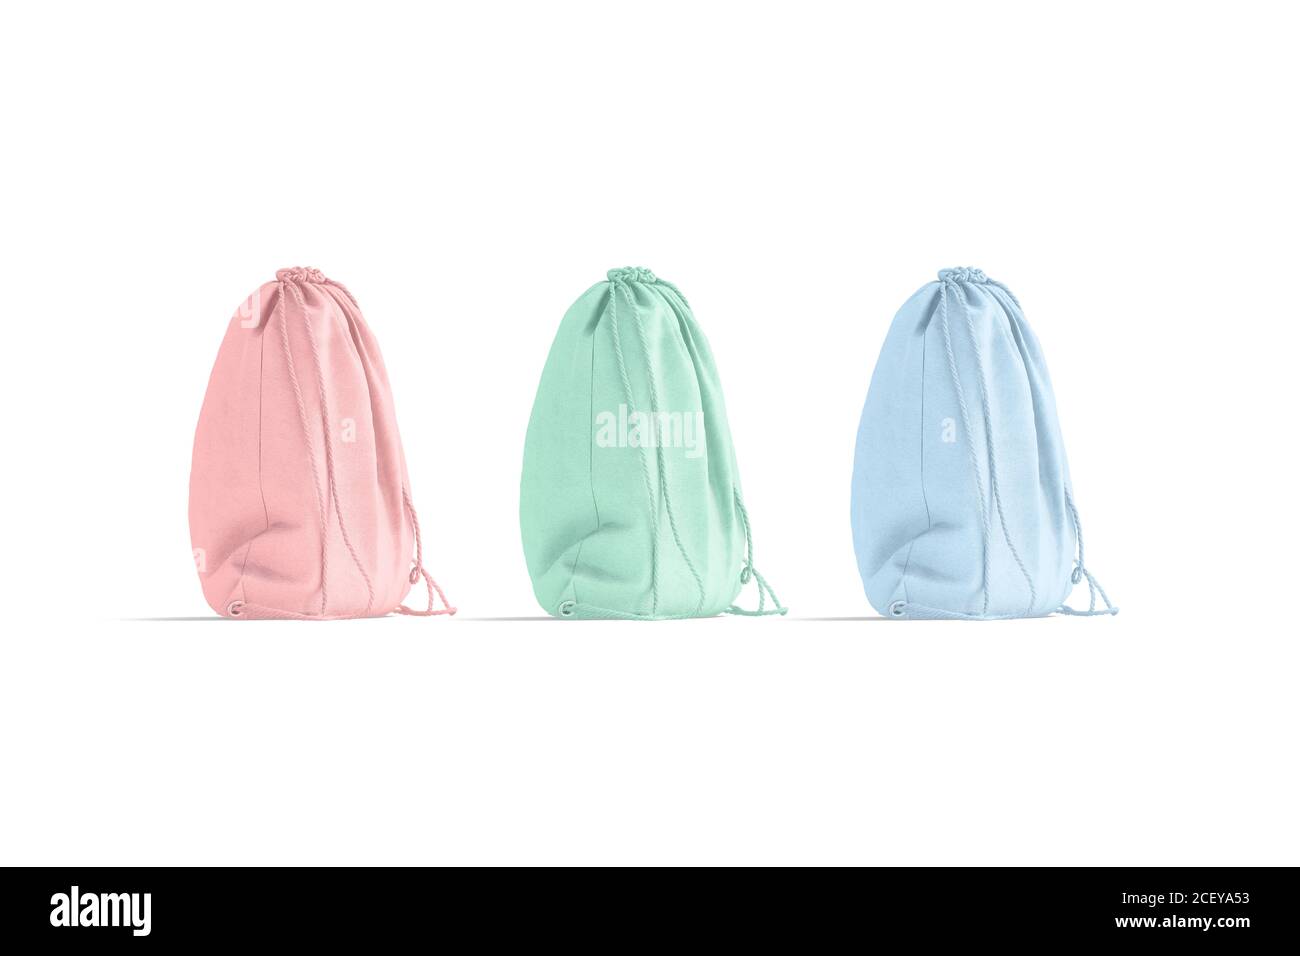 Blank colored drawstring backpack mockup, side view Stock Photo